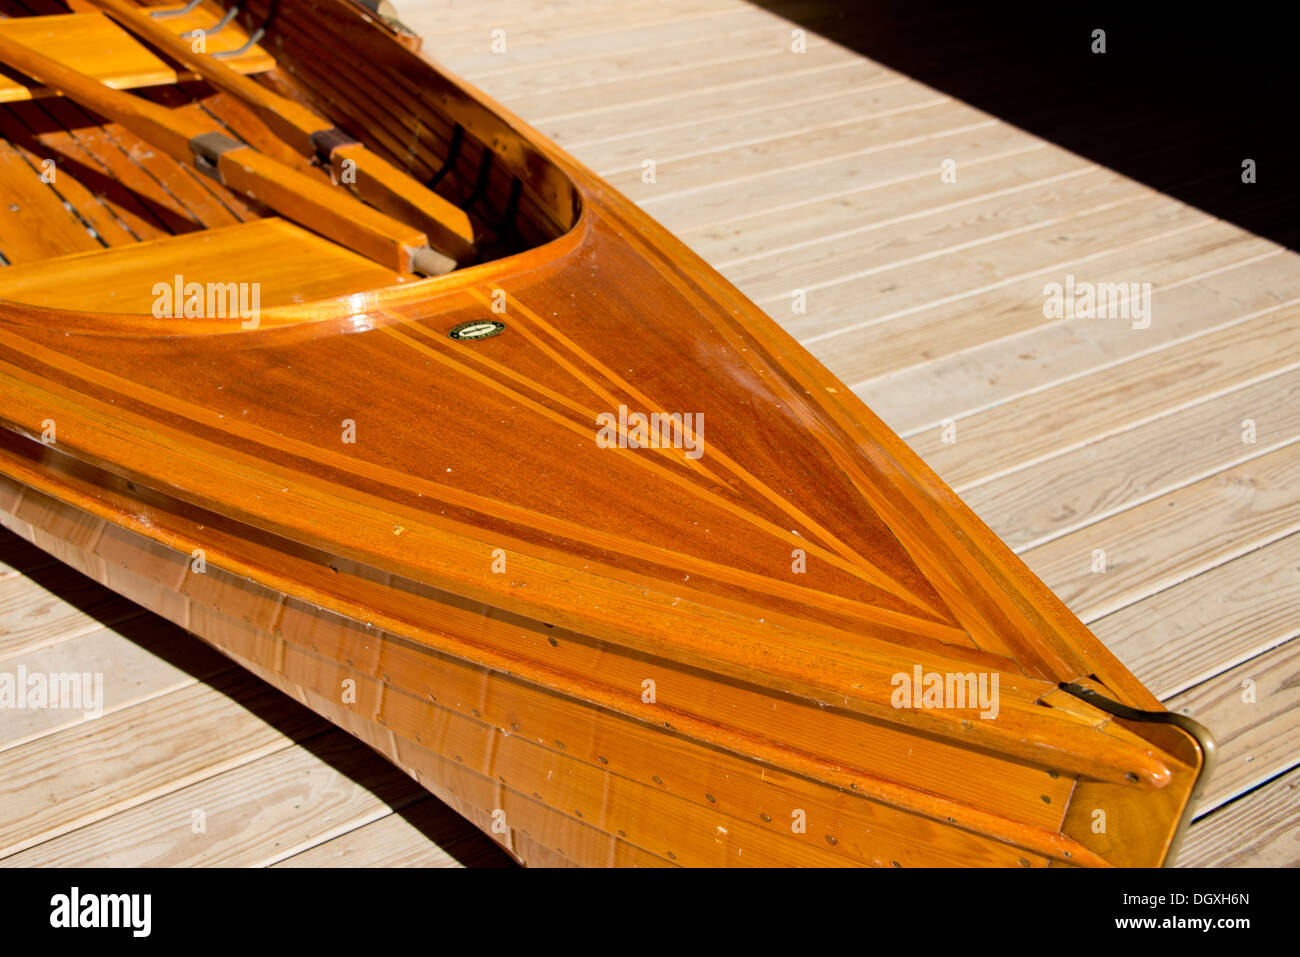 New York, Clayton. Antique Boat Museum. Southerland Boat and Coach vintage wooden canoe. Stock Photo